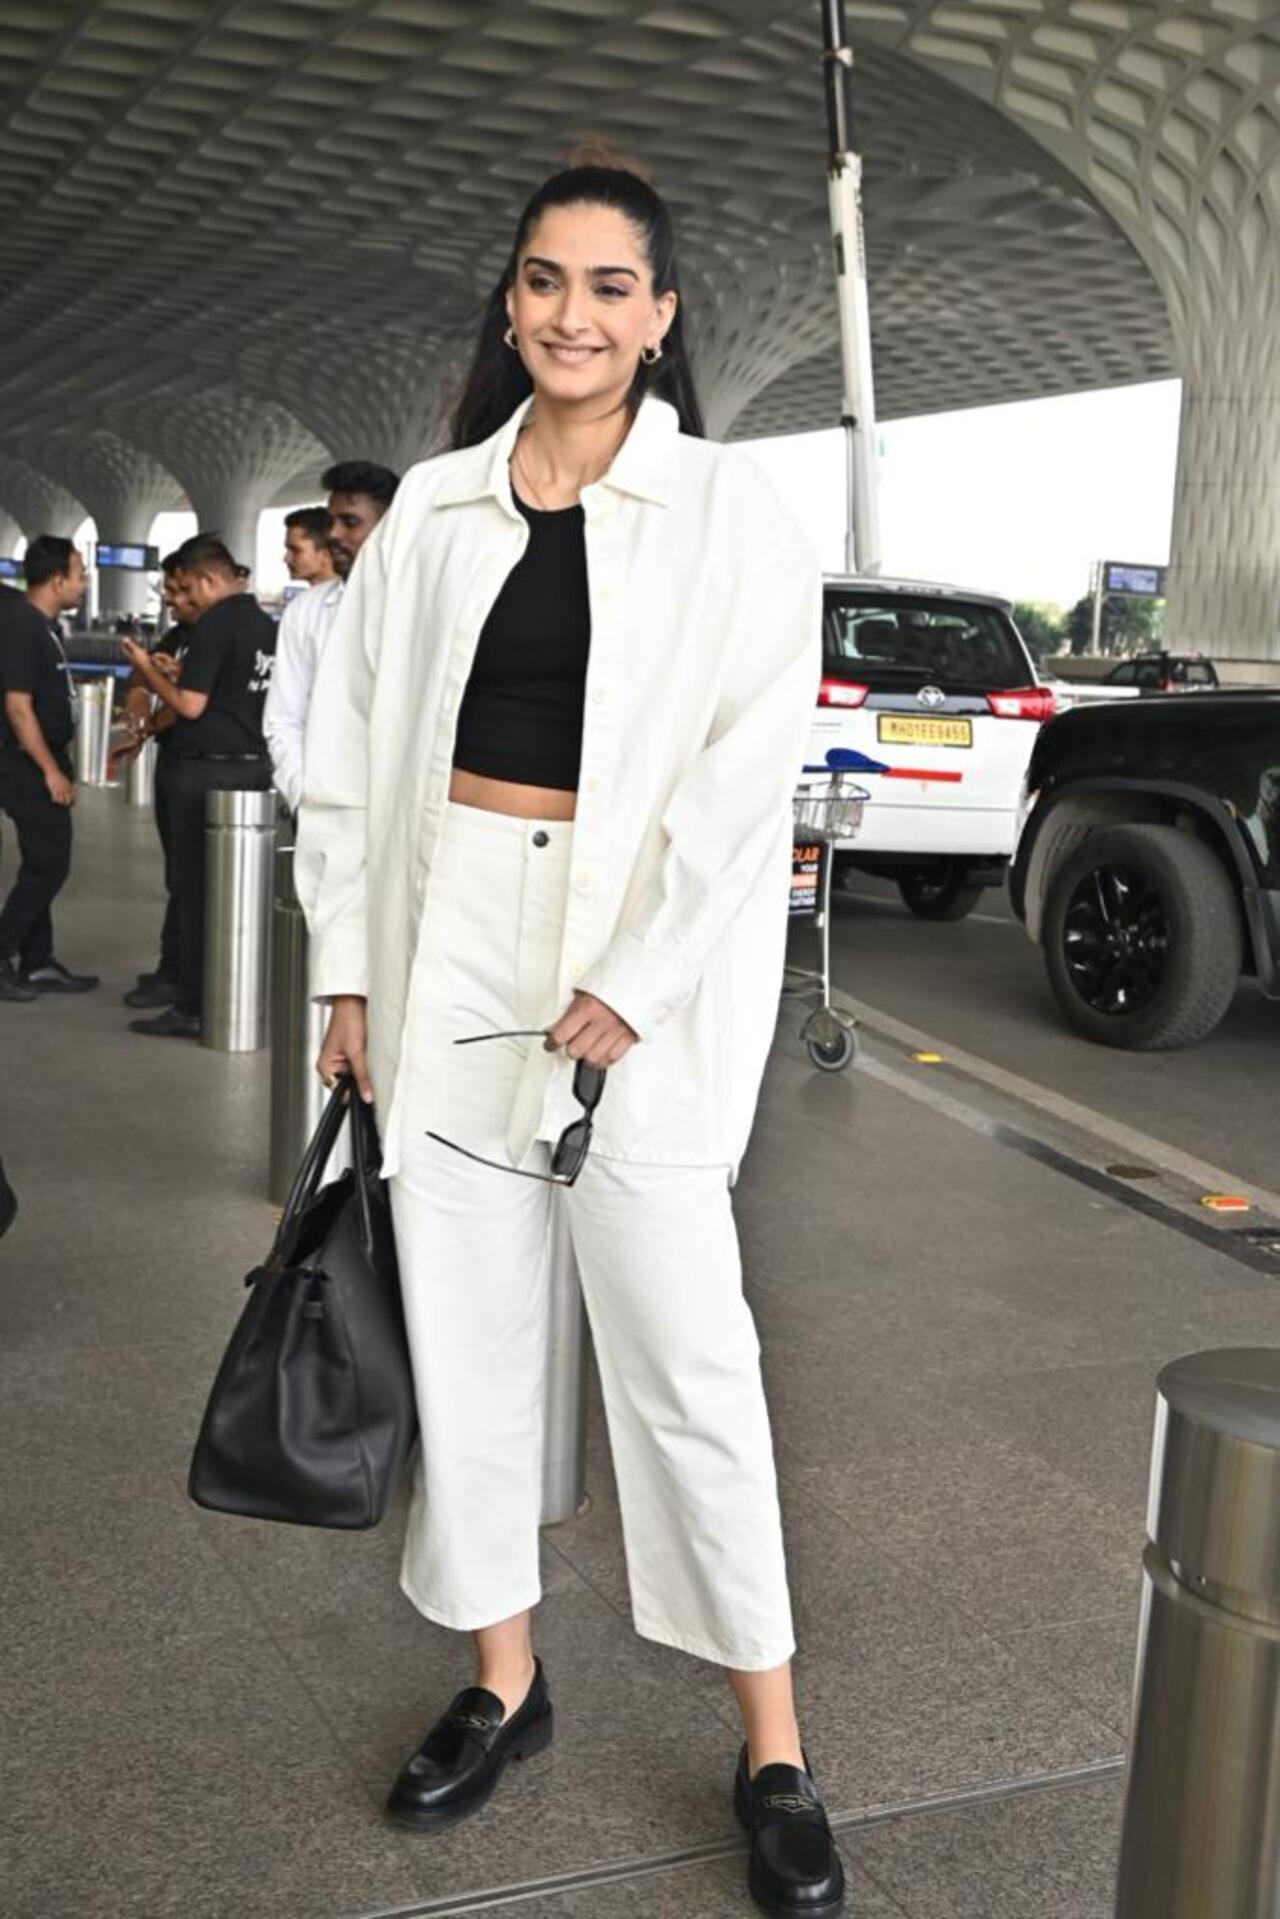 Sonam Kapoor travelled to Goa with her husband Anand Ahuja and son Vayu